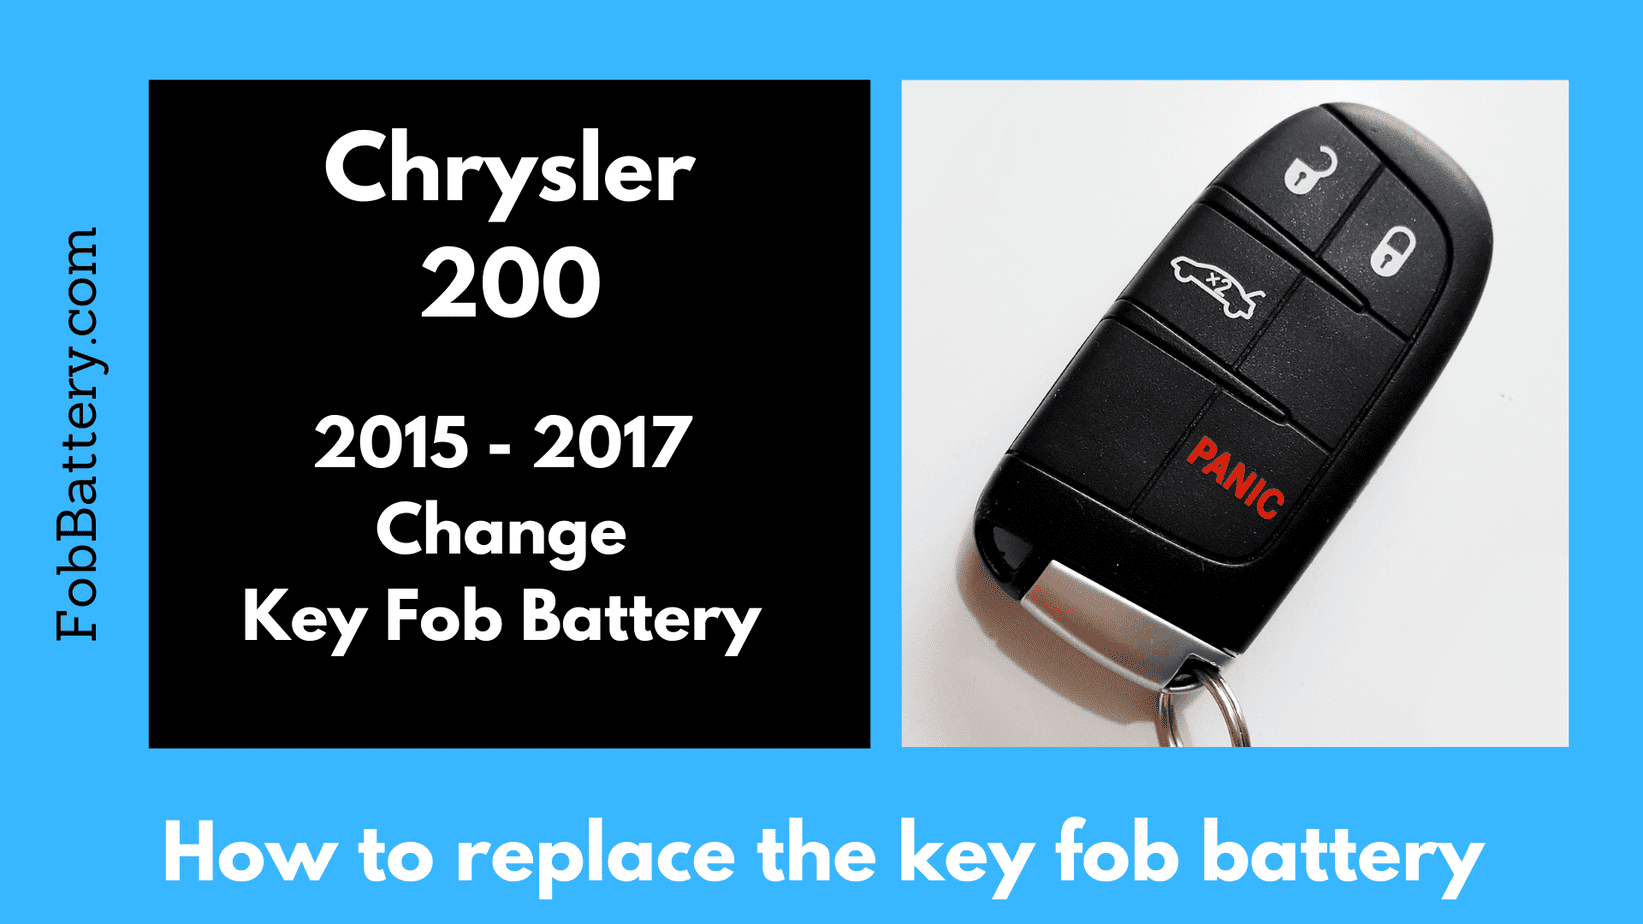 Chrysler 200 key fob battery replacement.